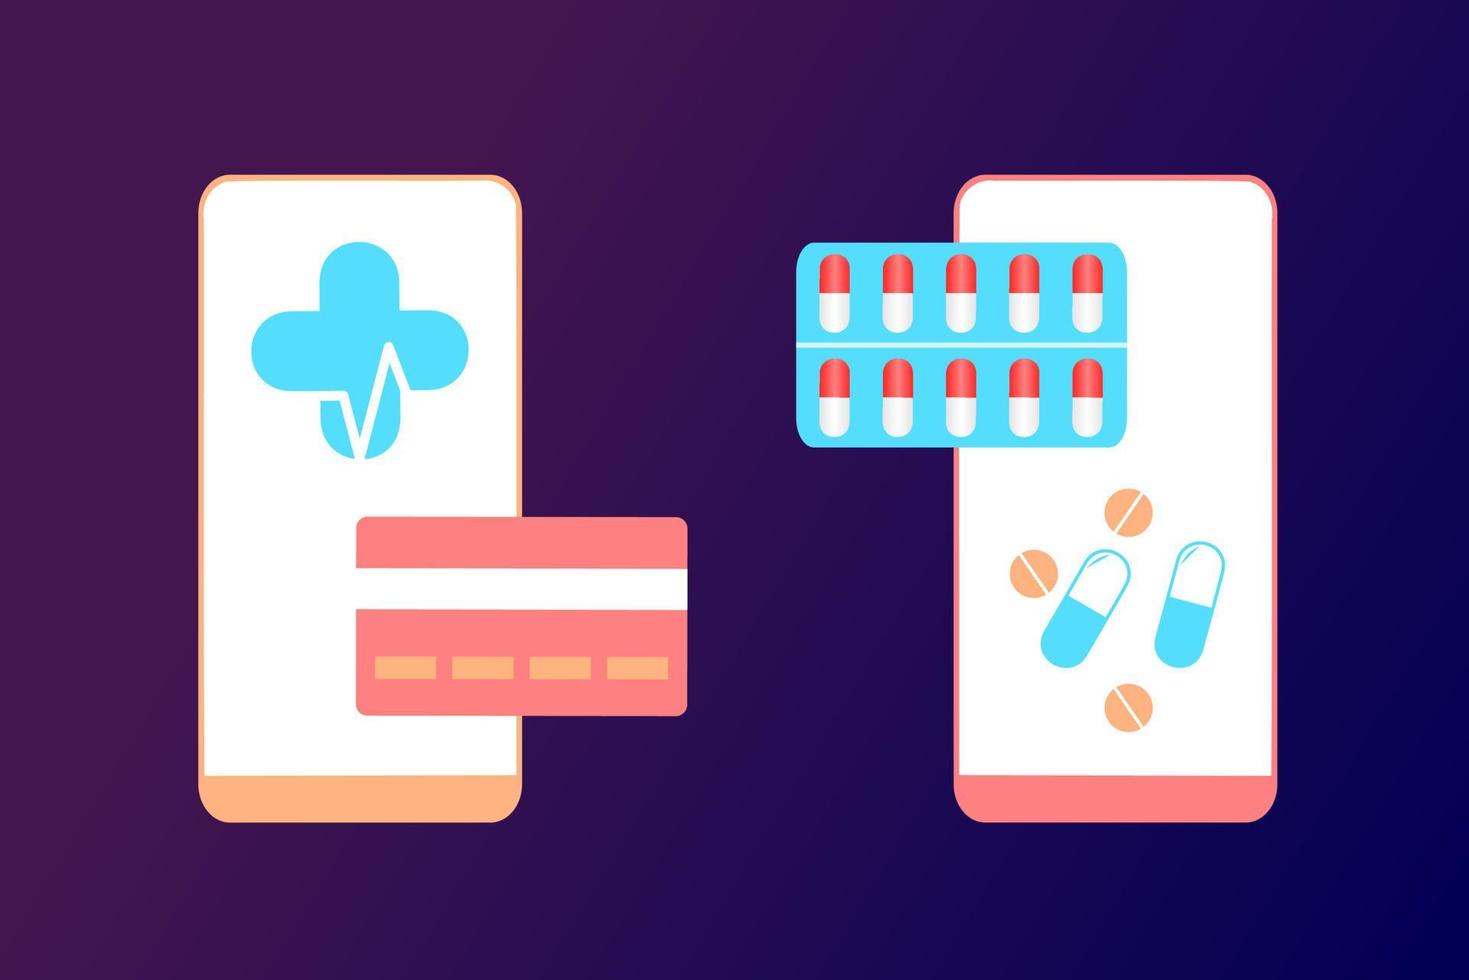 Online pharmacy app concept of healthcare, drugstore and e-commerce. Vector illustration of prescription drugs, first aid kit and medical supplies being sold online via web or computer technology.